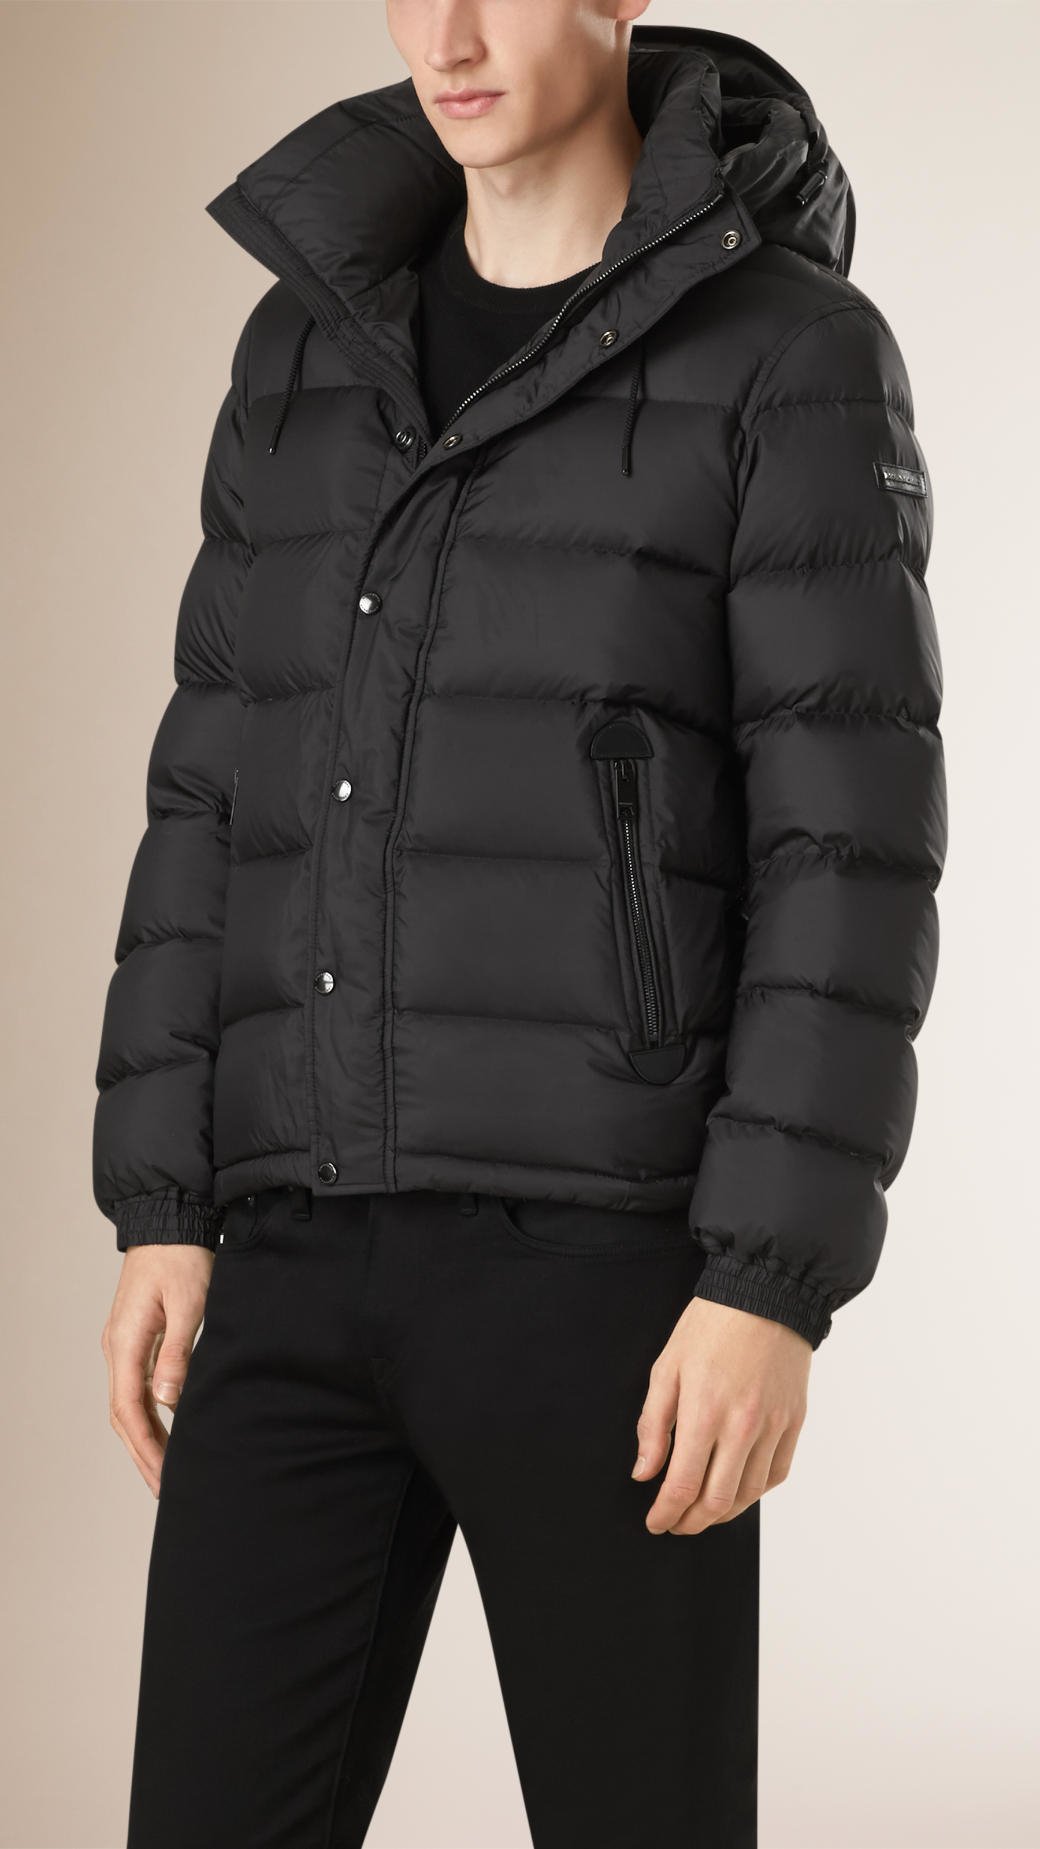 Burberry puffer jacket men's, renowned for its luxury fashion and timeless designs, offers a distinguished collection of puffer jackets